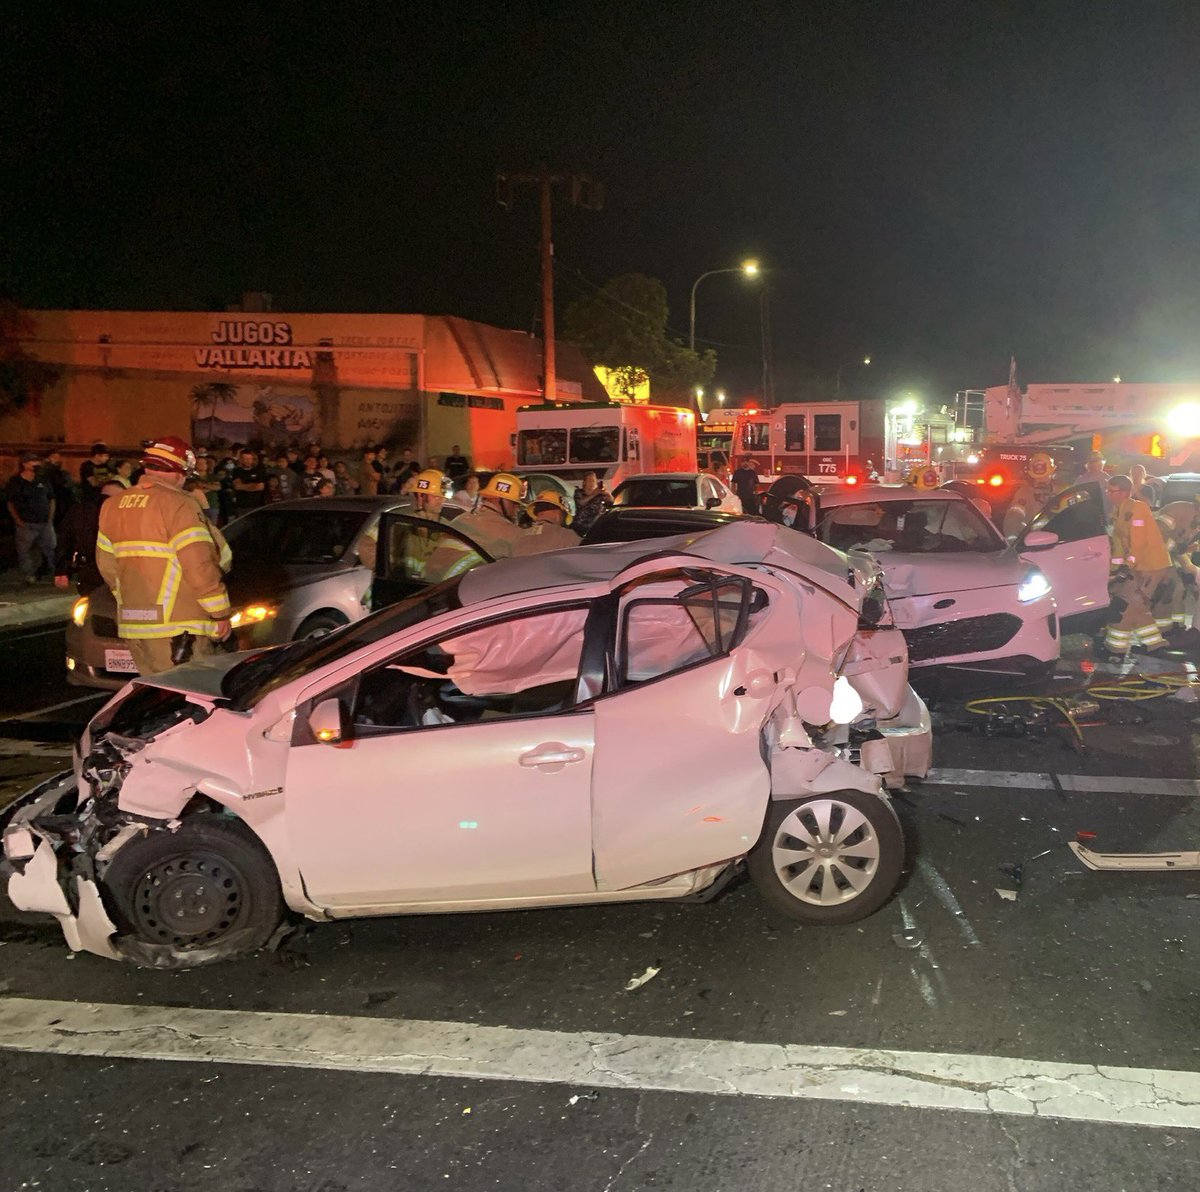 Santa Ana - Firefighters found six vehicles involved in a traffic collision at N. Bristol St & W. 1st St when they arrived on scene. T75 declared the incident a multi-casualty incident &amp; requested additional paramedic units &amp; ambulances